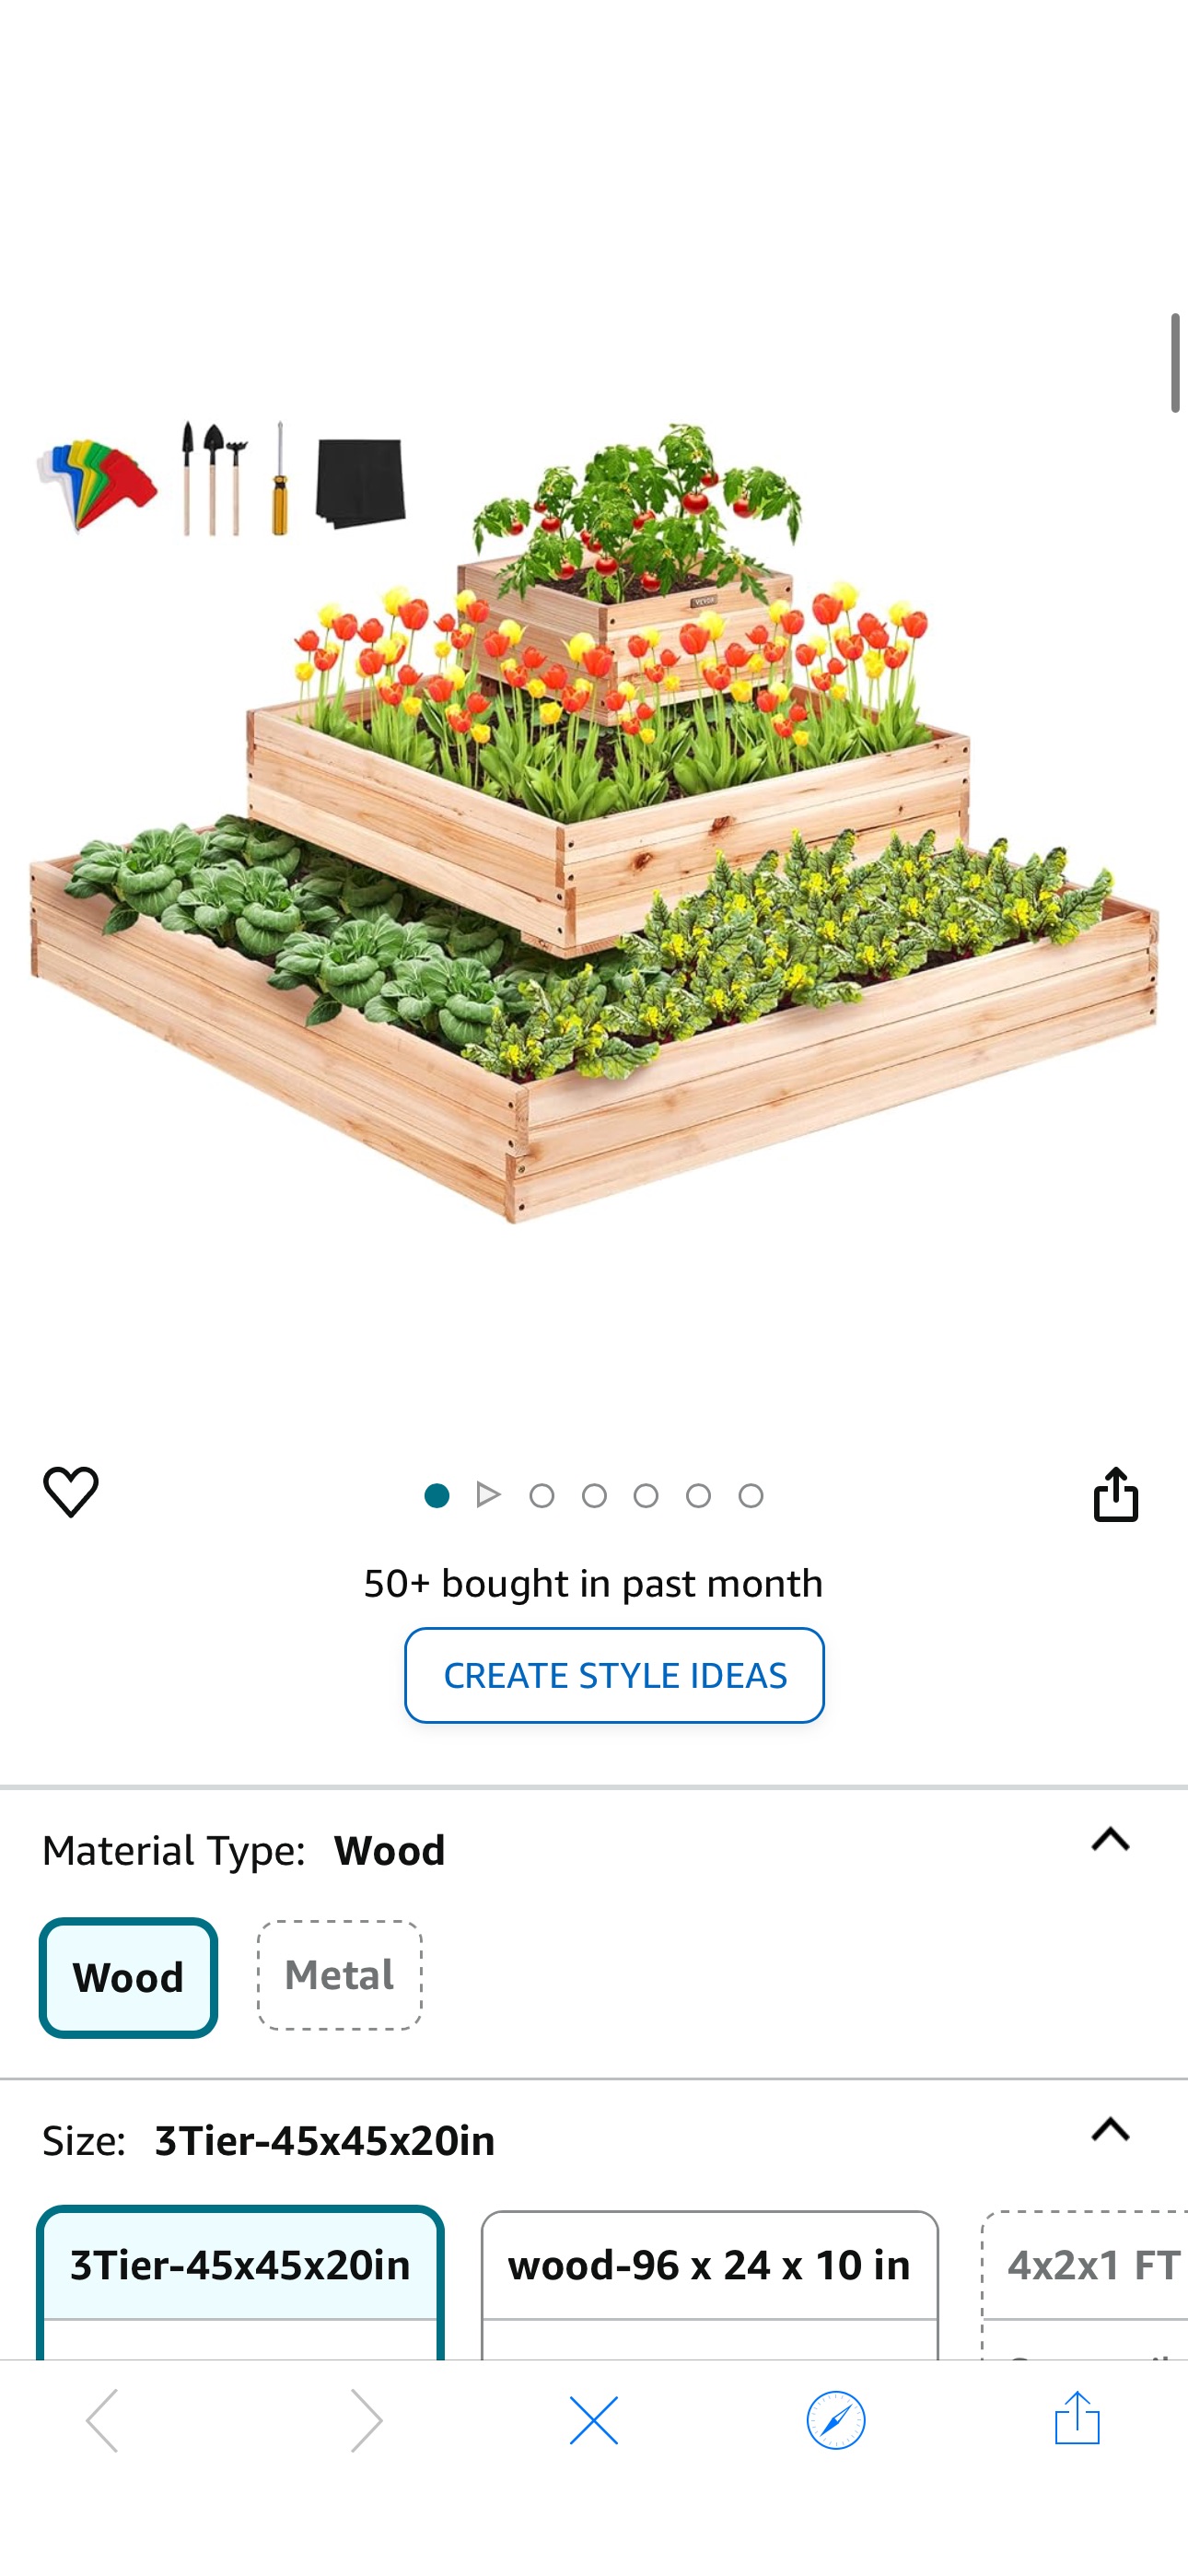 Amazon.com: VEVOR 3 Tier Raised Garden Bed Wood Outdoor, 45 x 45 x 20in High End Natural Fir Wood Planter Box, Outdoor Planting Boxes for Flowers/Vegetables/Herbs in Backyard/Garden/Patio/Balcony, wit